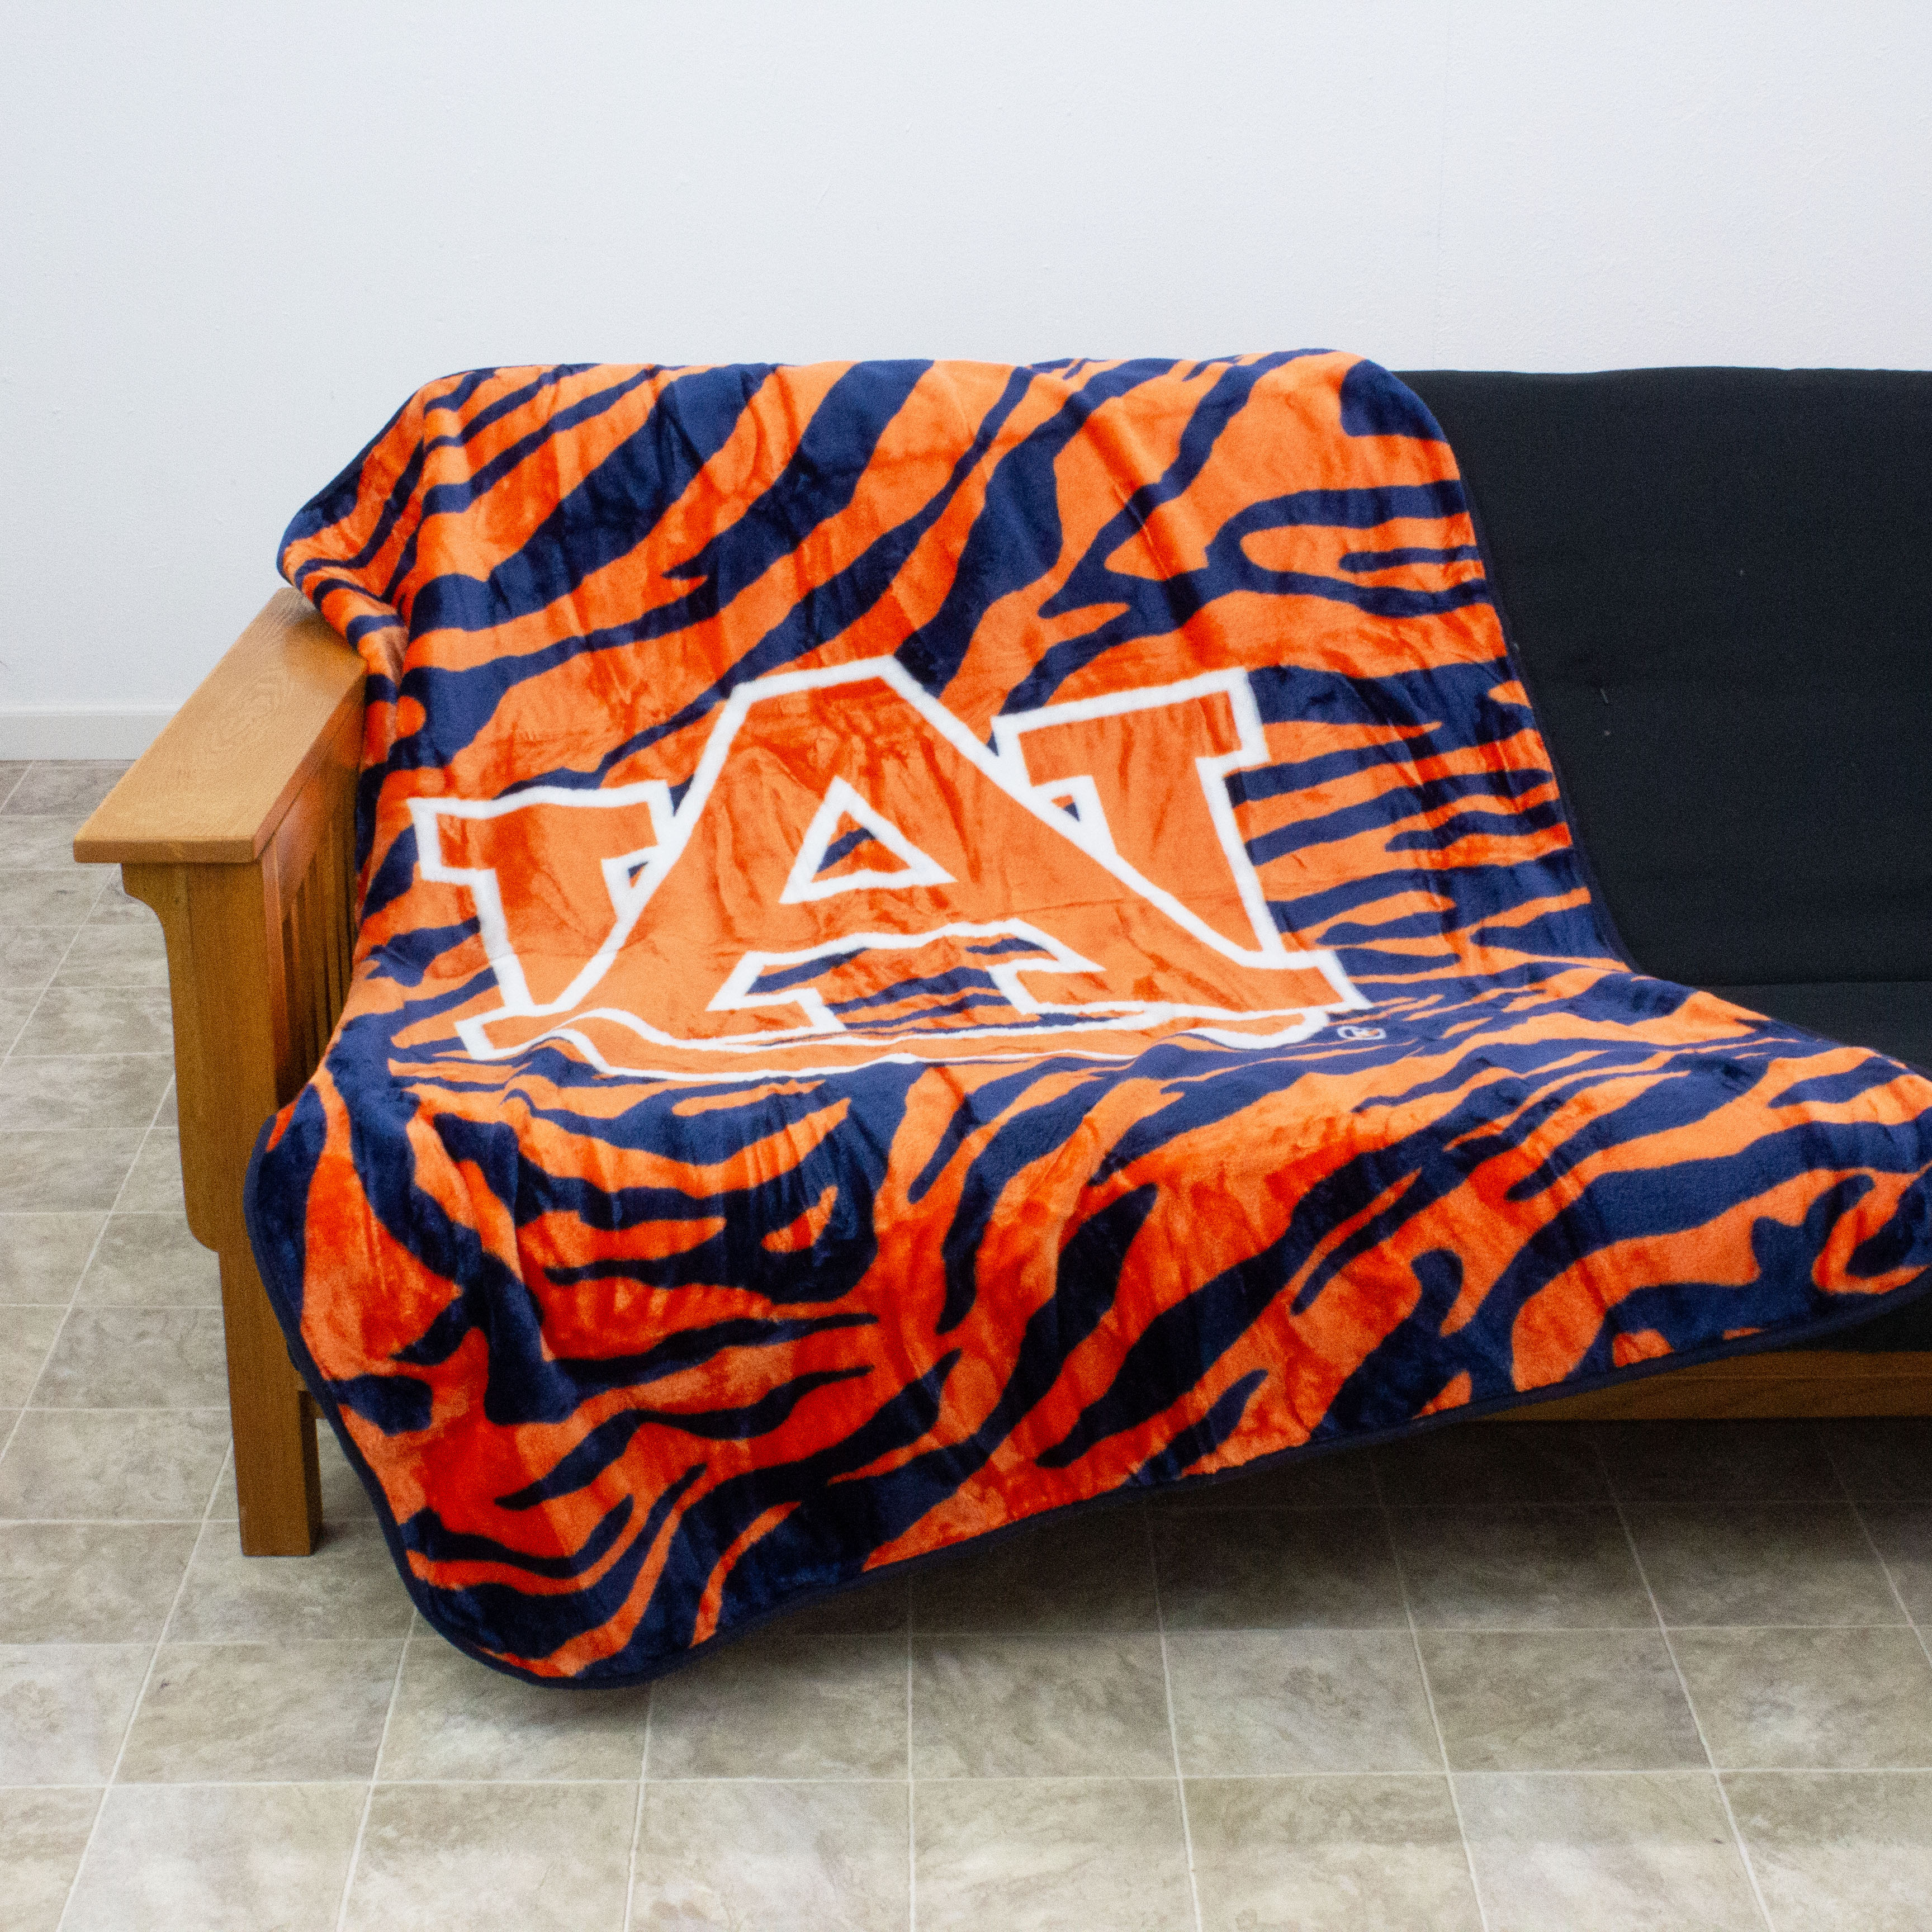 College Covers Everything Comfy Auburn Tigers Soft Raschel Throw Blanket, 60" x 50" - image 3 of 8